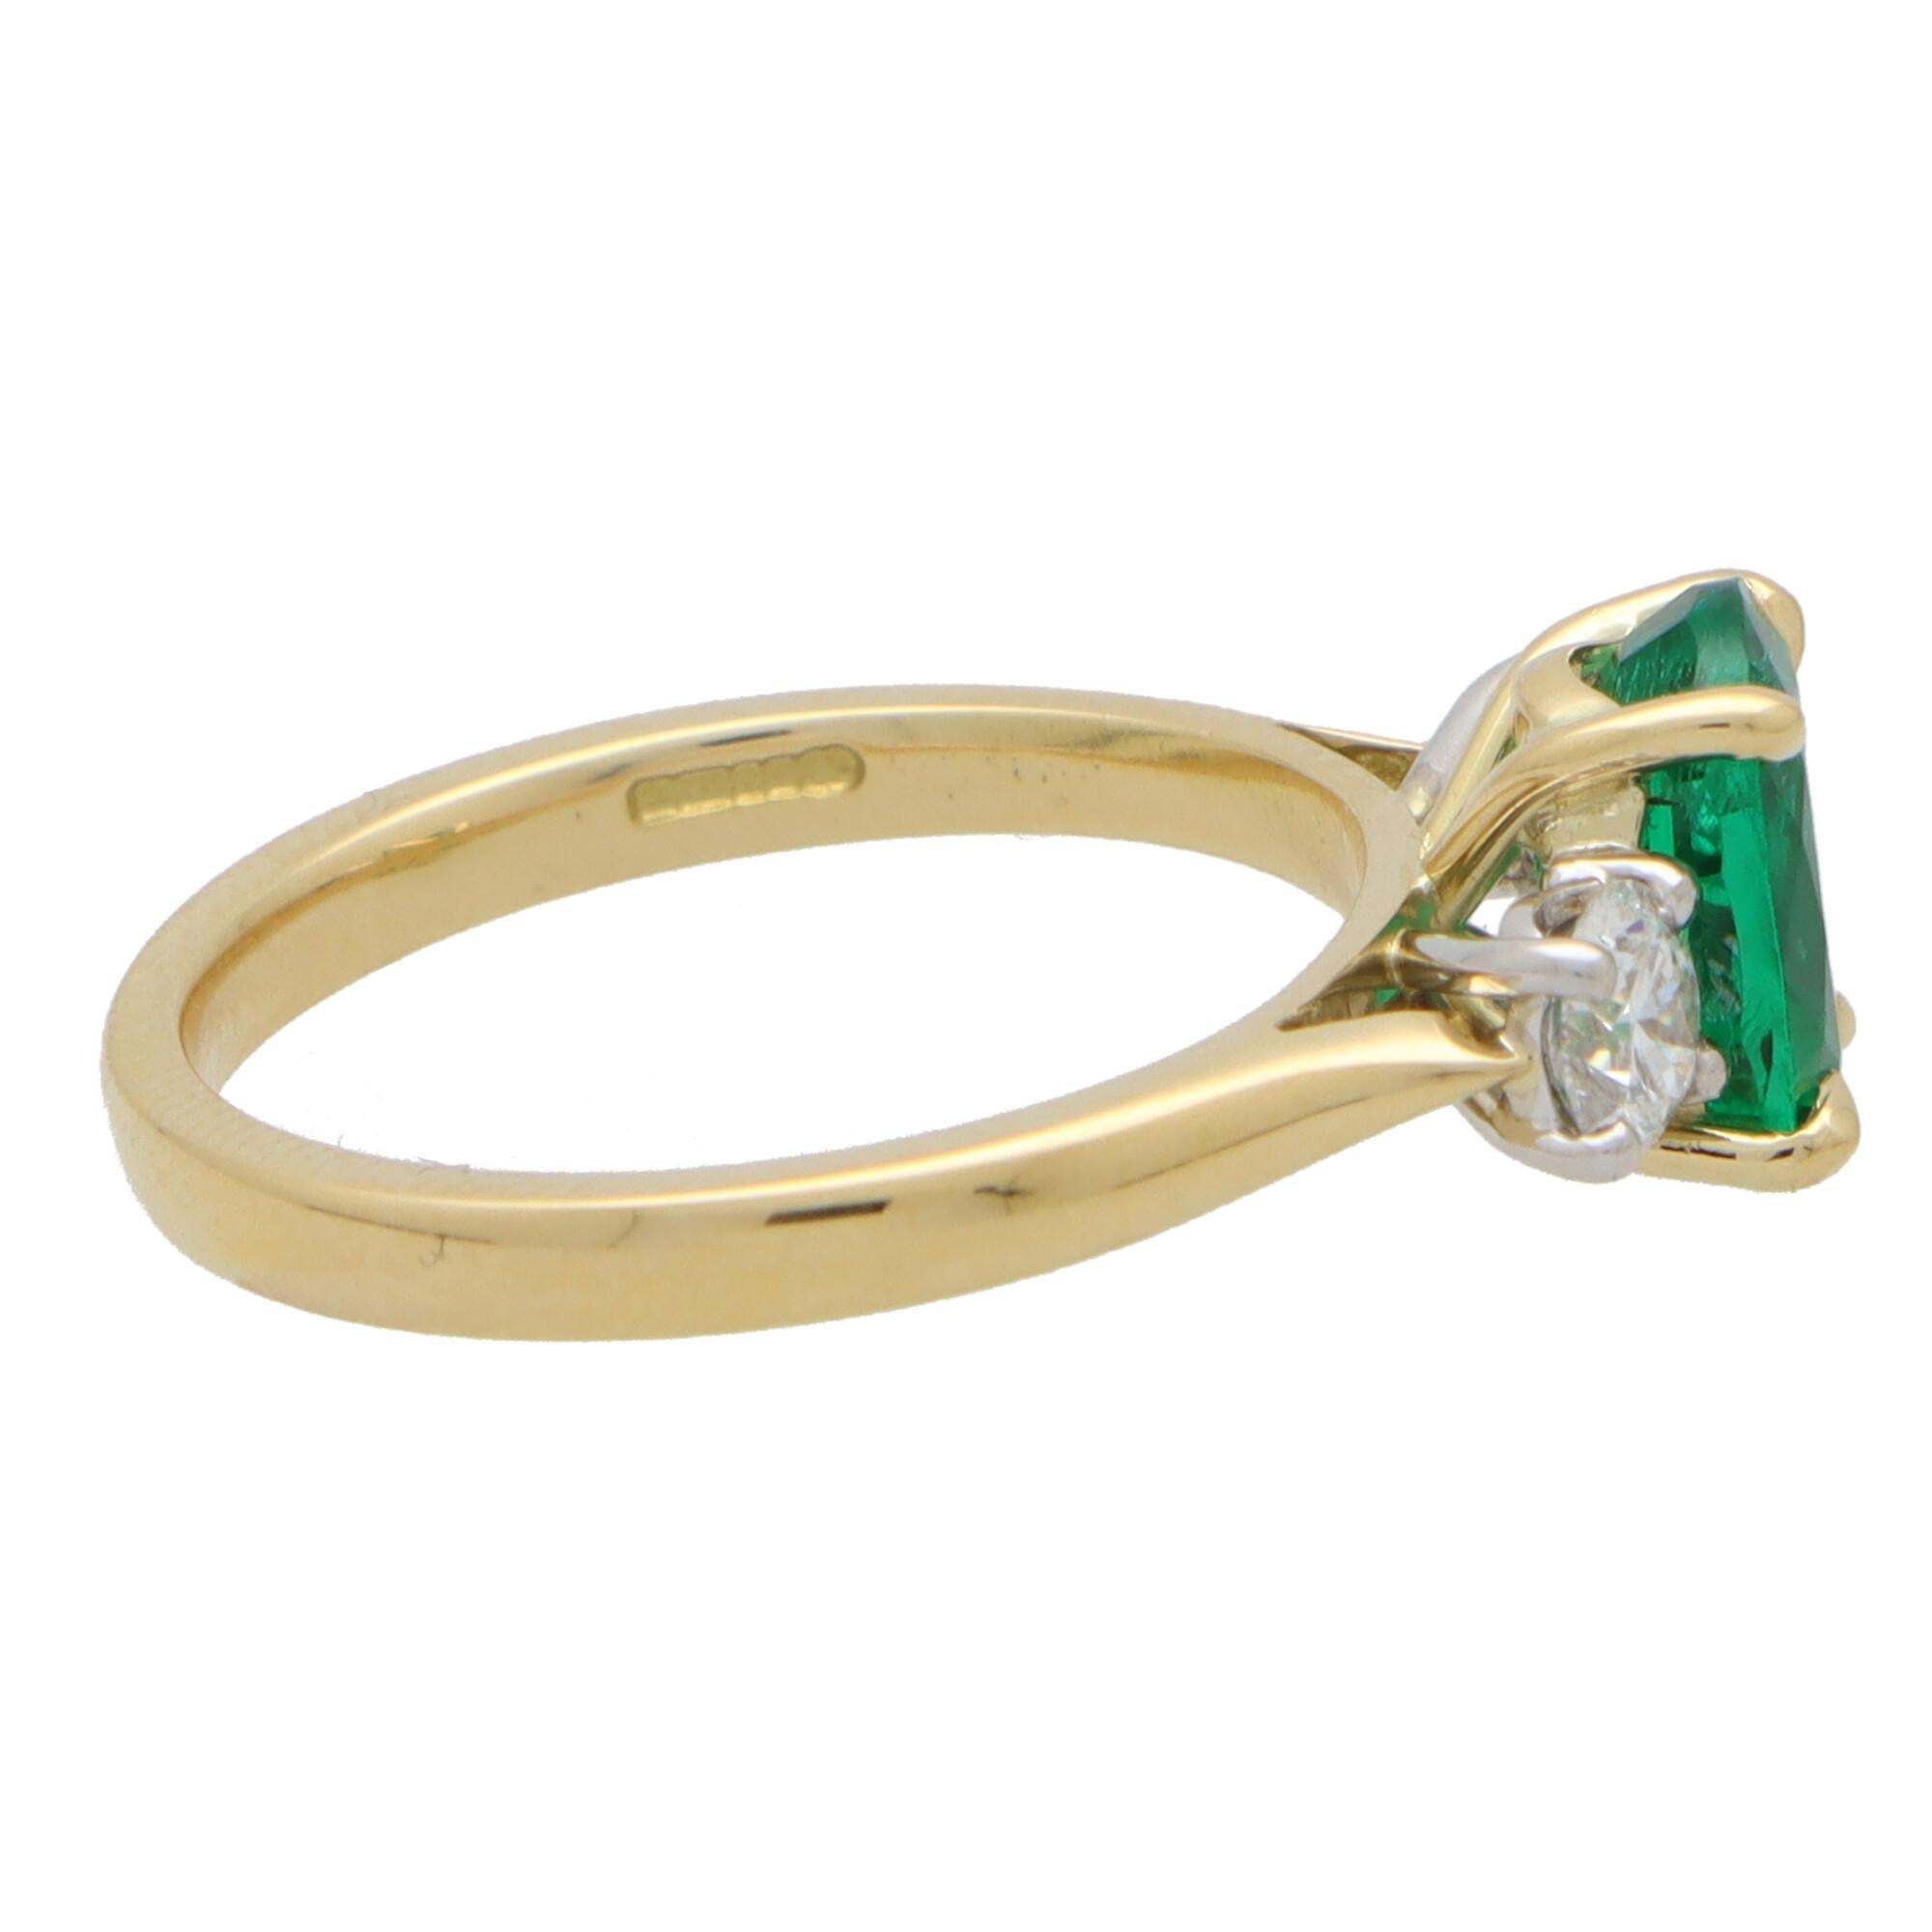 Women's or Men's GIA Certified Emerald and Diamond Three Stone Ring Set in 18k Yellow Gold